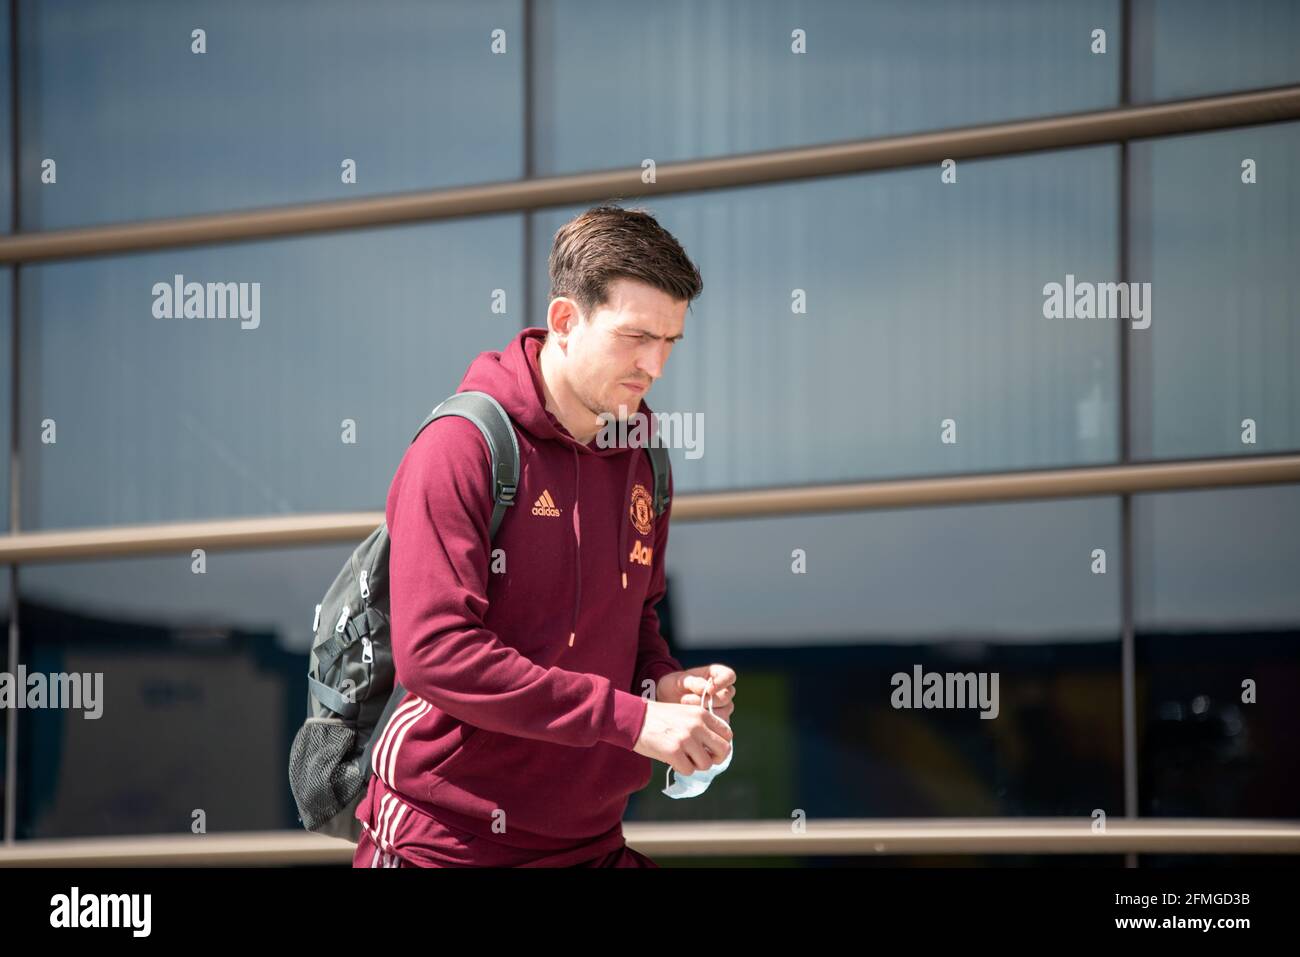 Birmingham, UK. 9th May, 2021. Harry Maguire is seen here leaving a hotel before a Sunday match against Aston Villa. He was forced to leave the pitch after injuries. Credit: Ryan Underwood/Alamy Live News Stock Photo